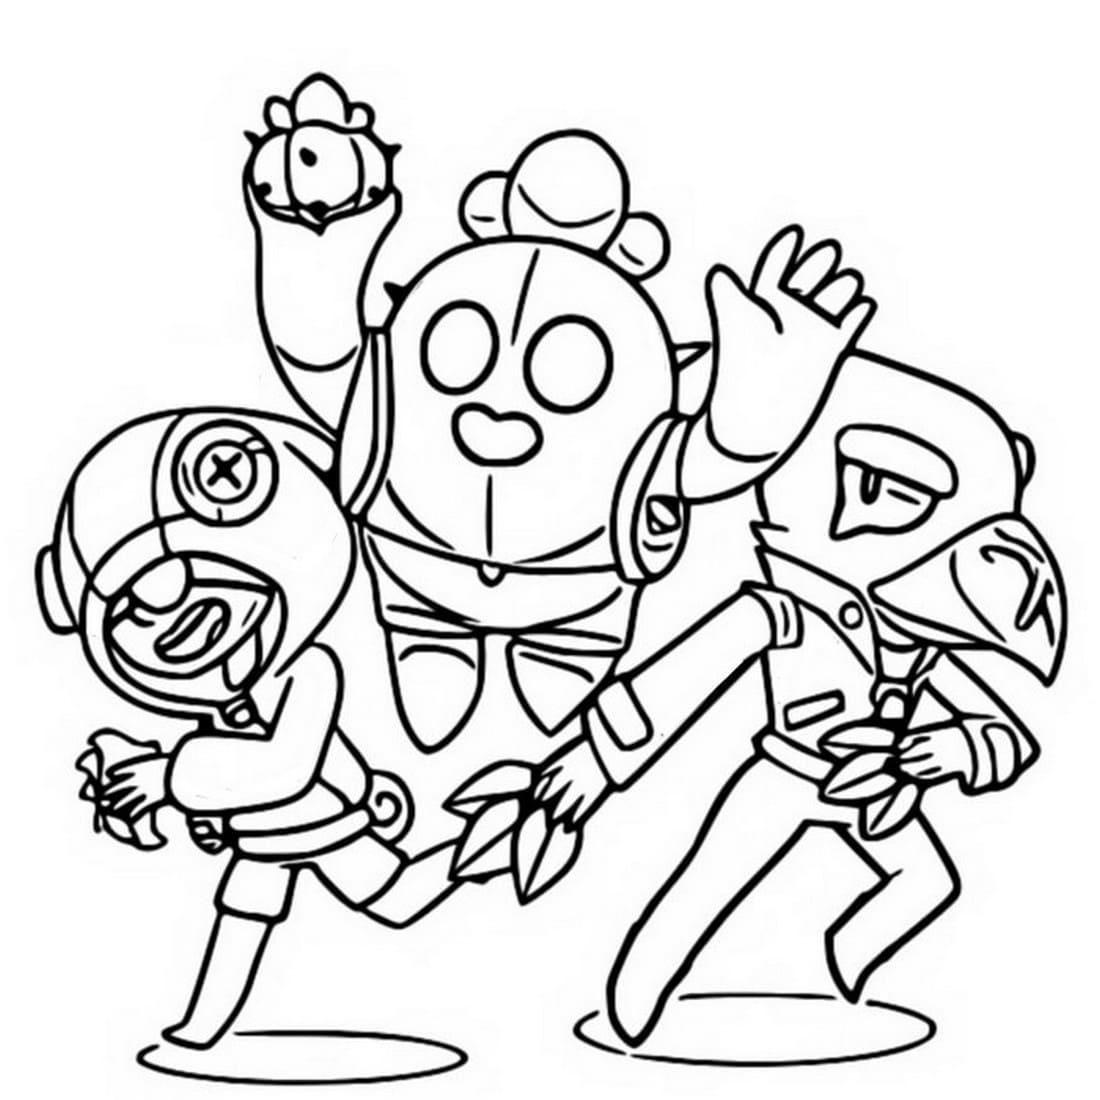 Brawl Stars Coloring Pages 1571